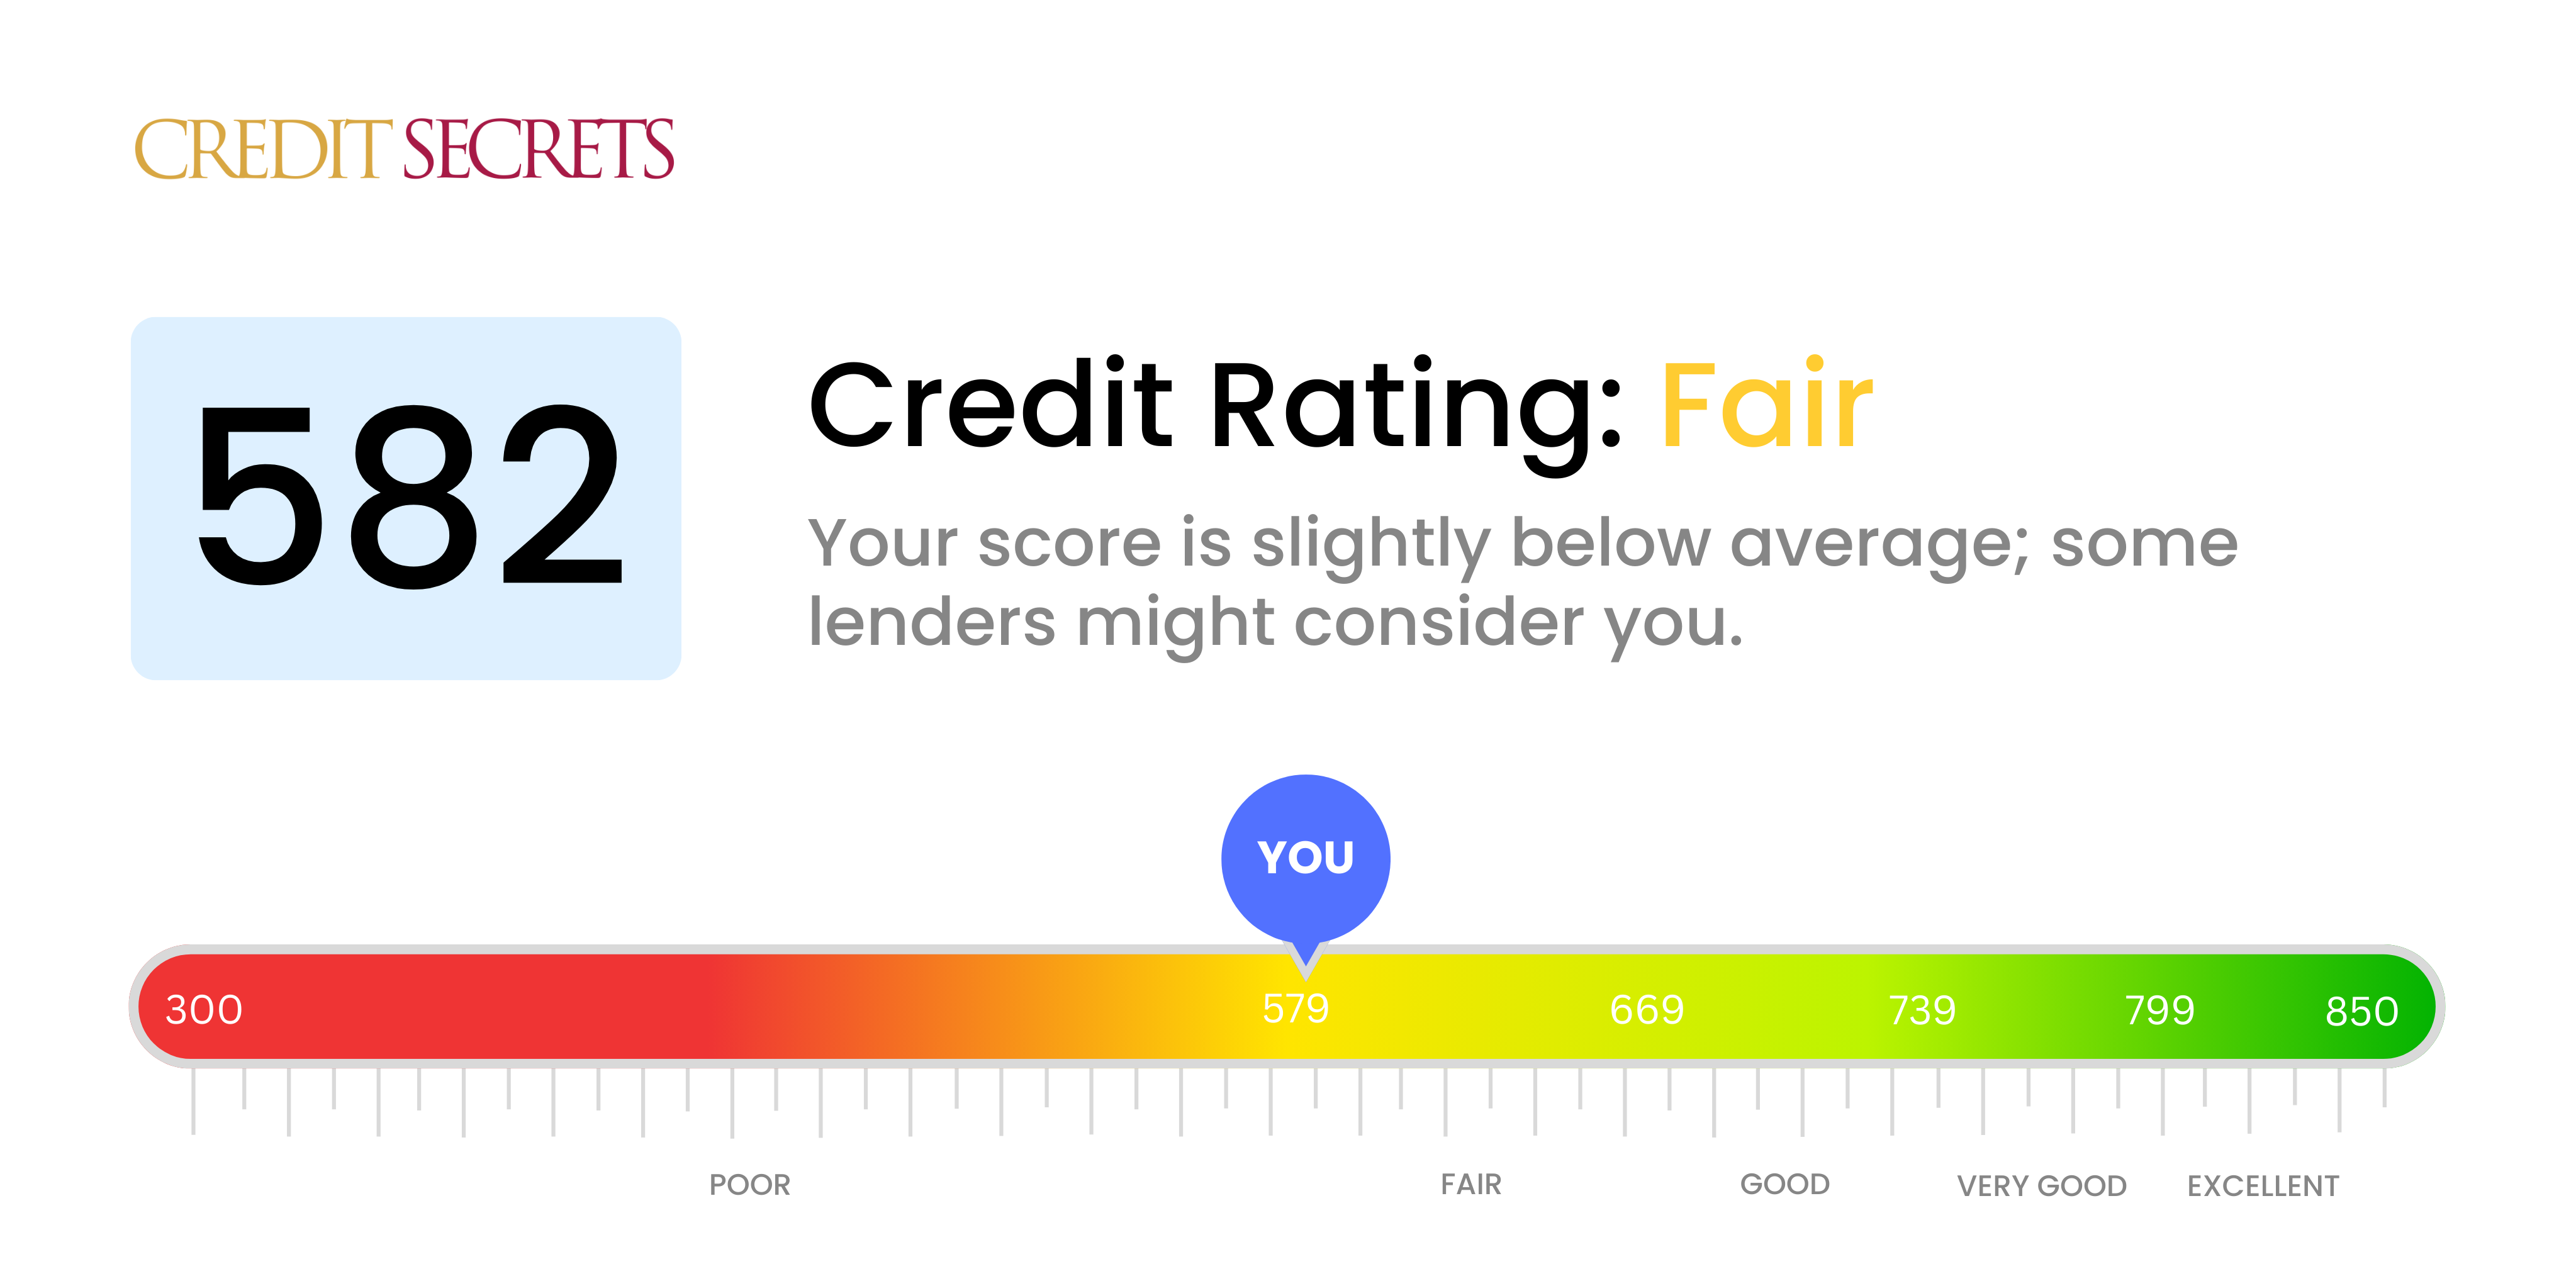 Is 582 a good credit score?